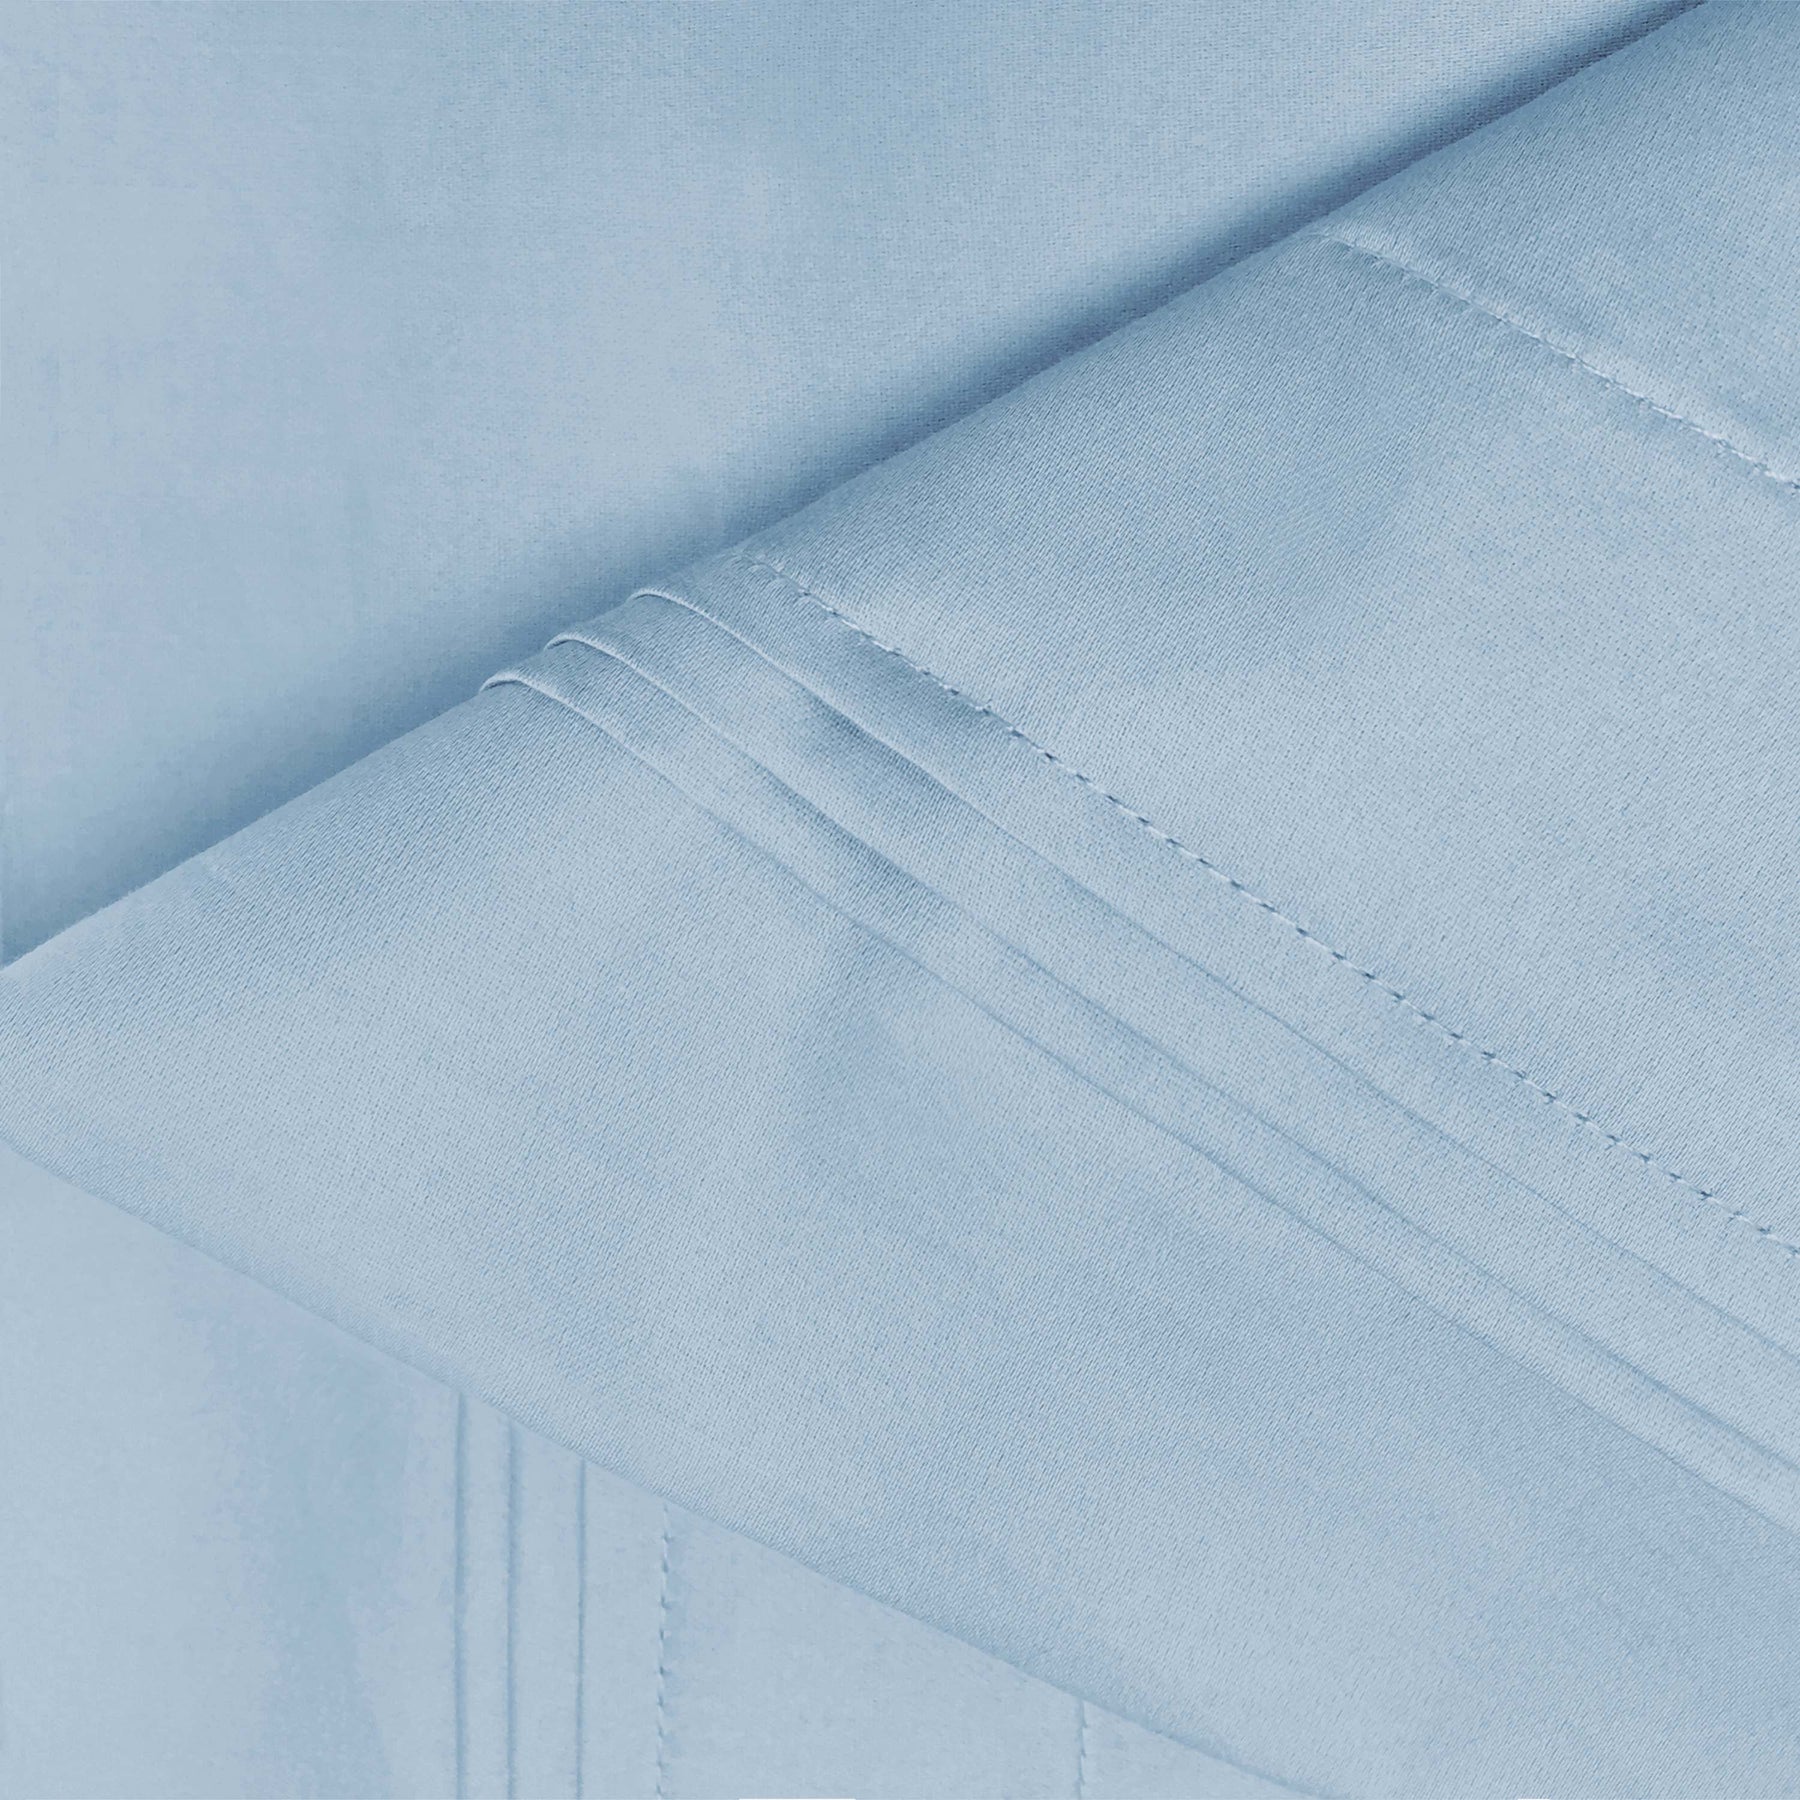 Egyptian Cotton 650 Thread Count Eco-Friendly Solid Sheet Set - BabyBlue